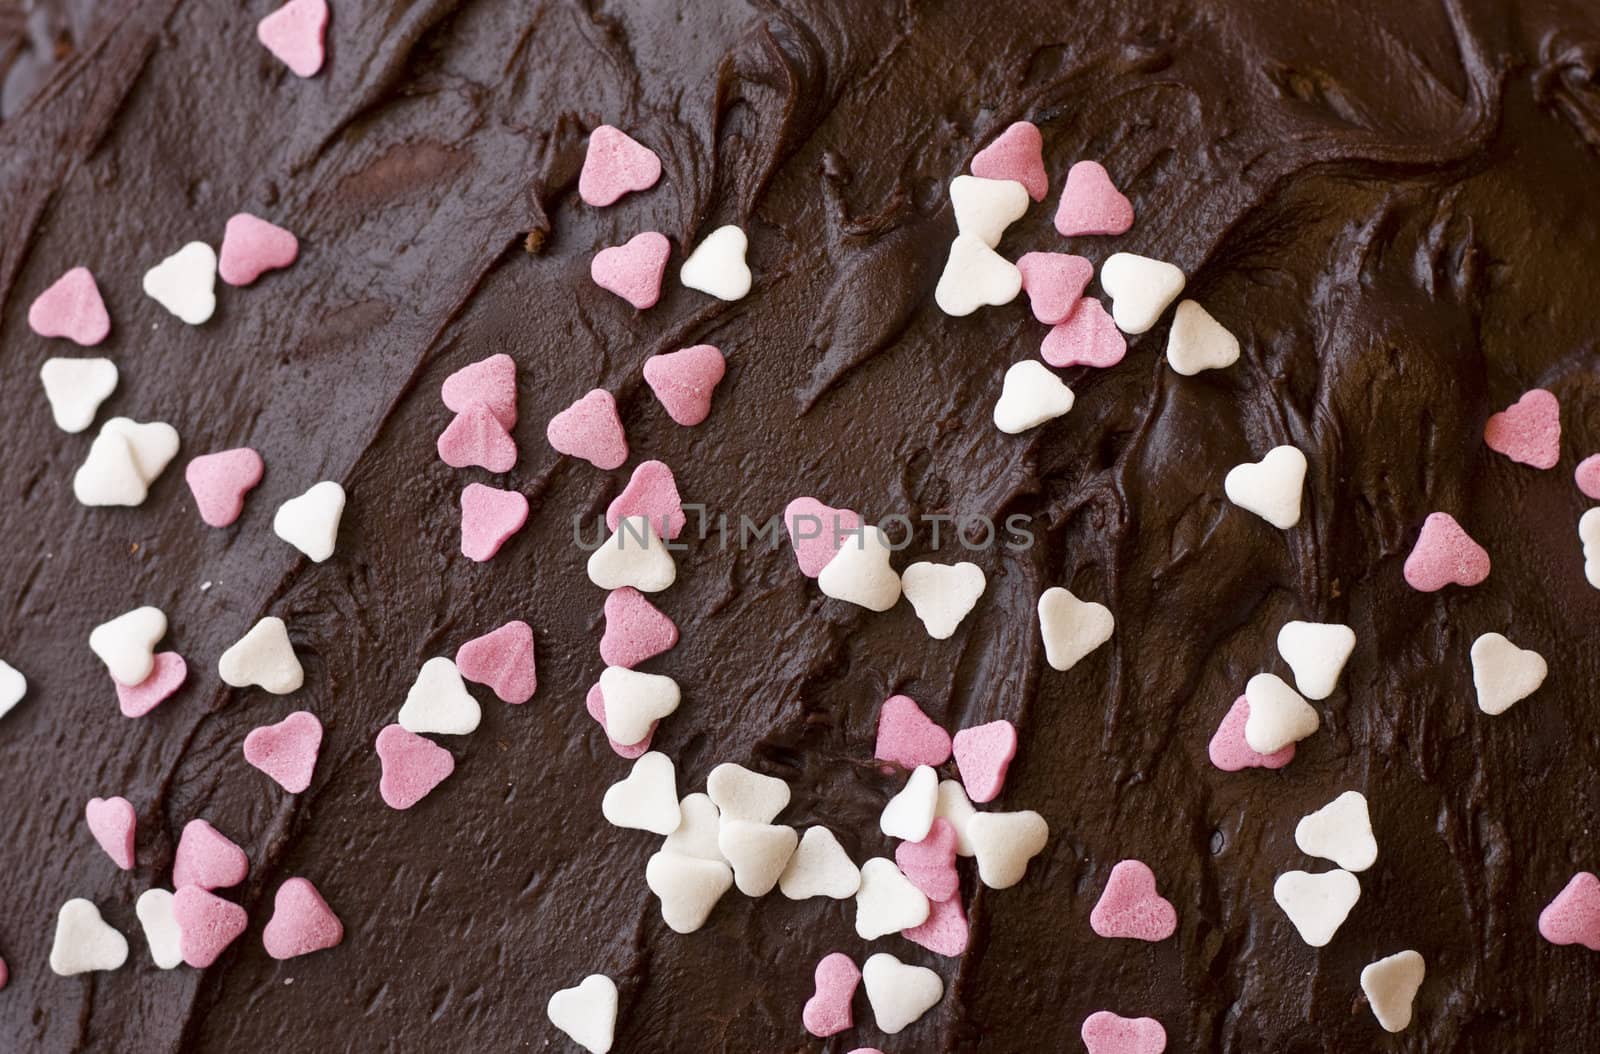 Chocolate frosting with pink and white hearts